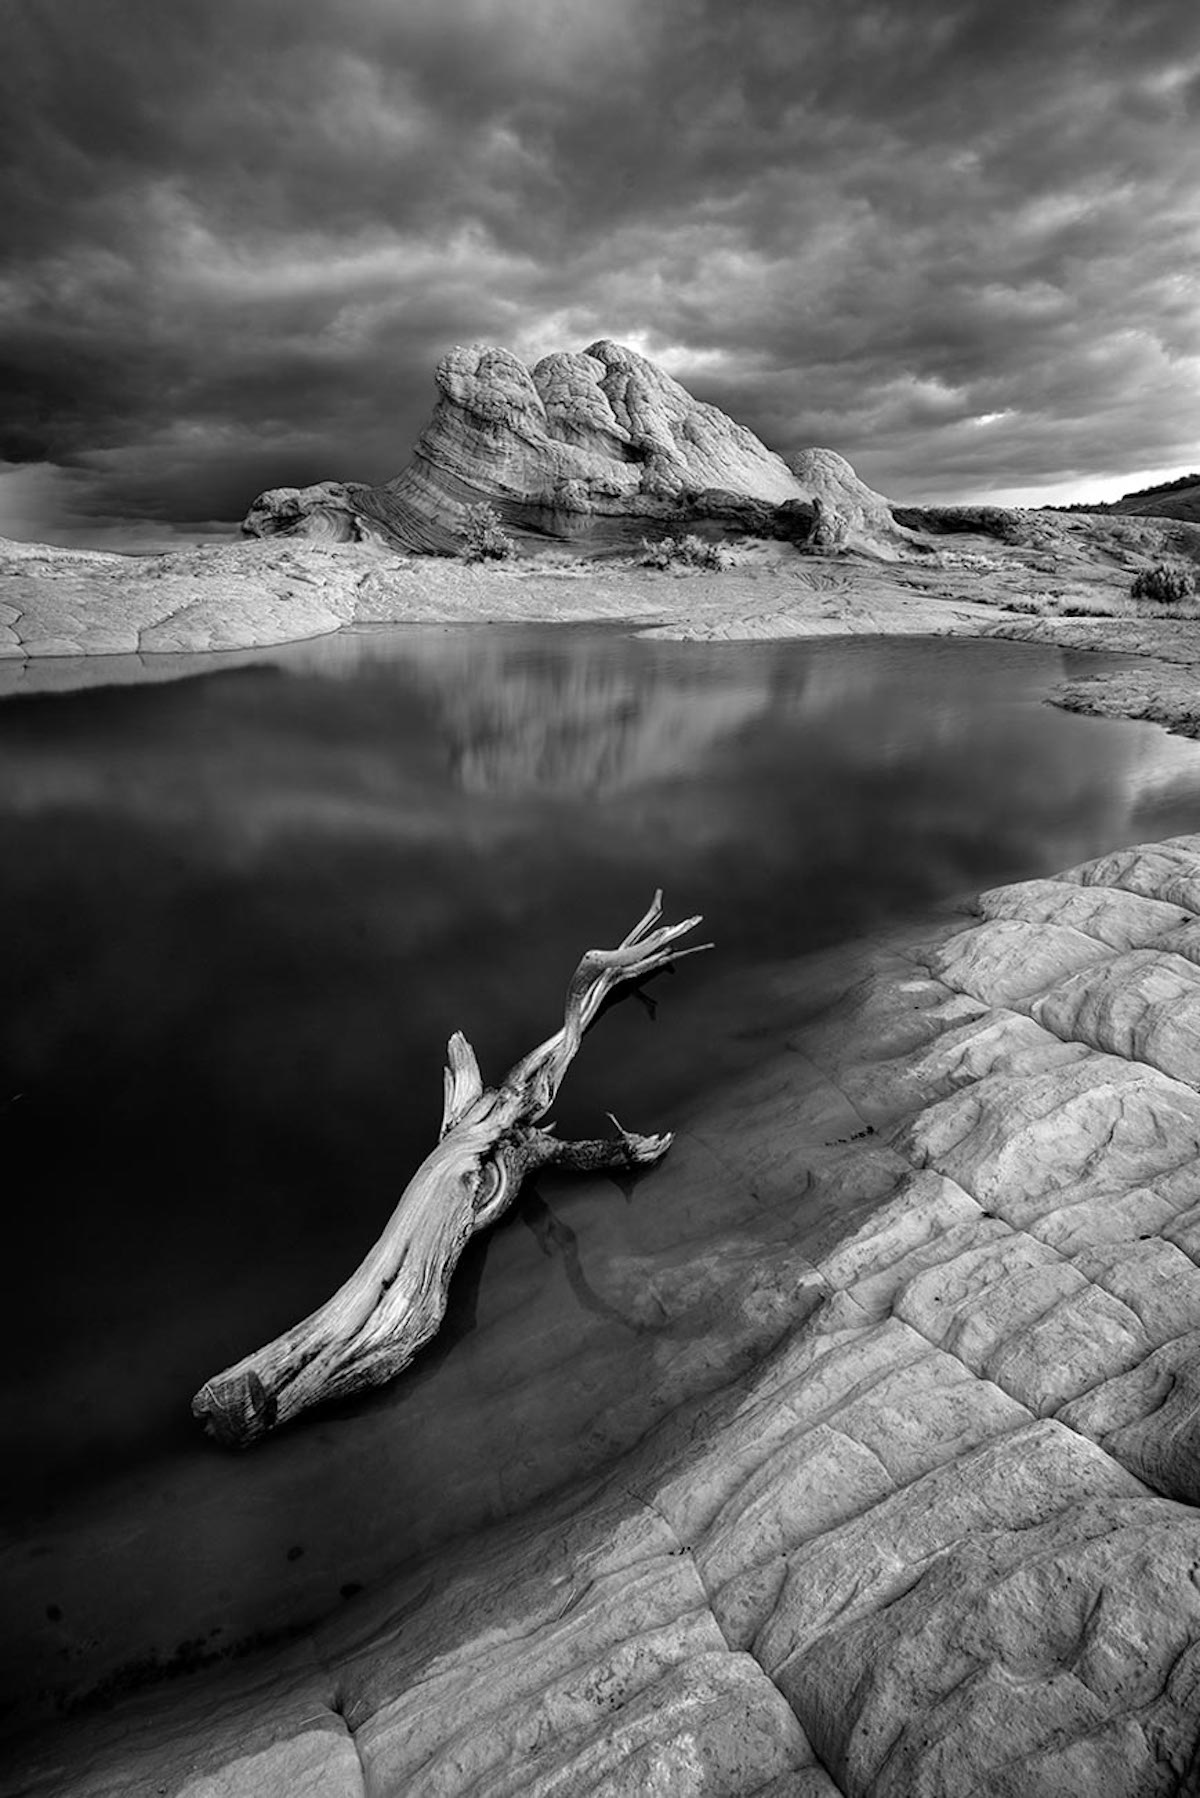 Infrared Photography Contest from Kolari Vision